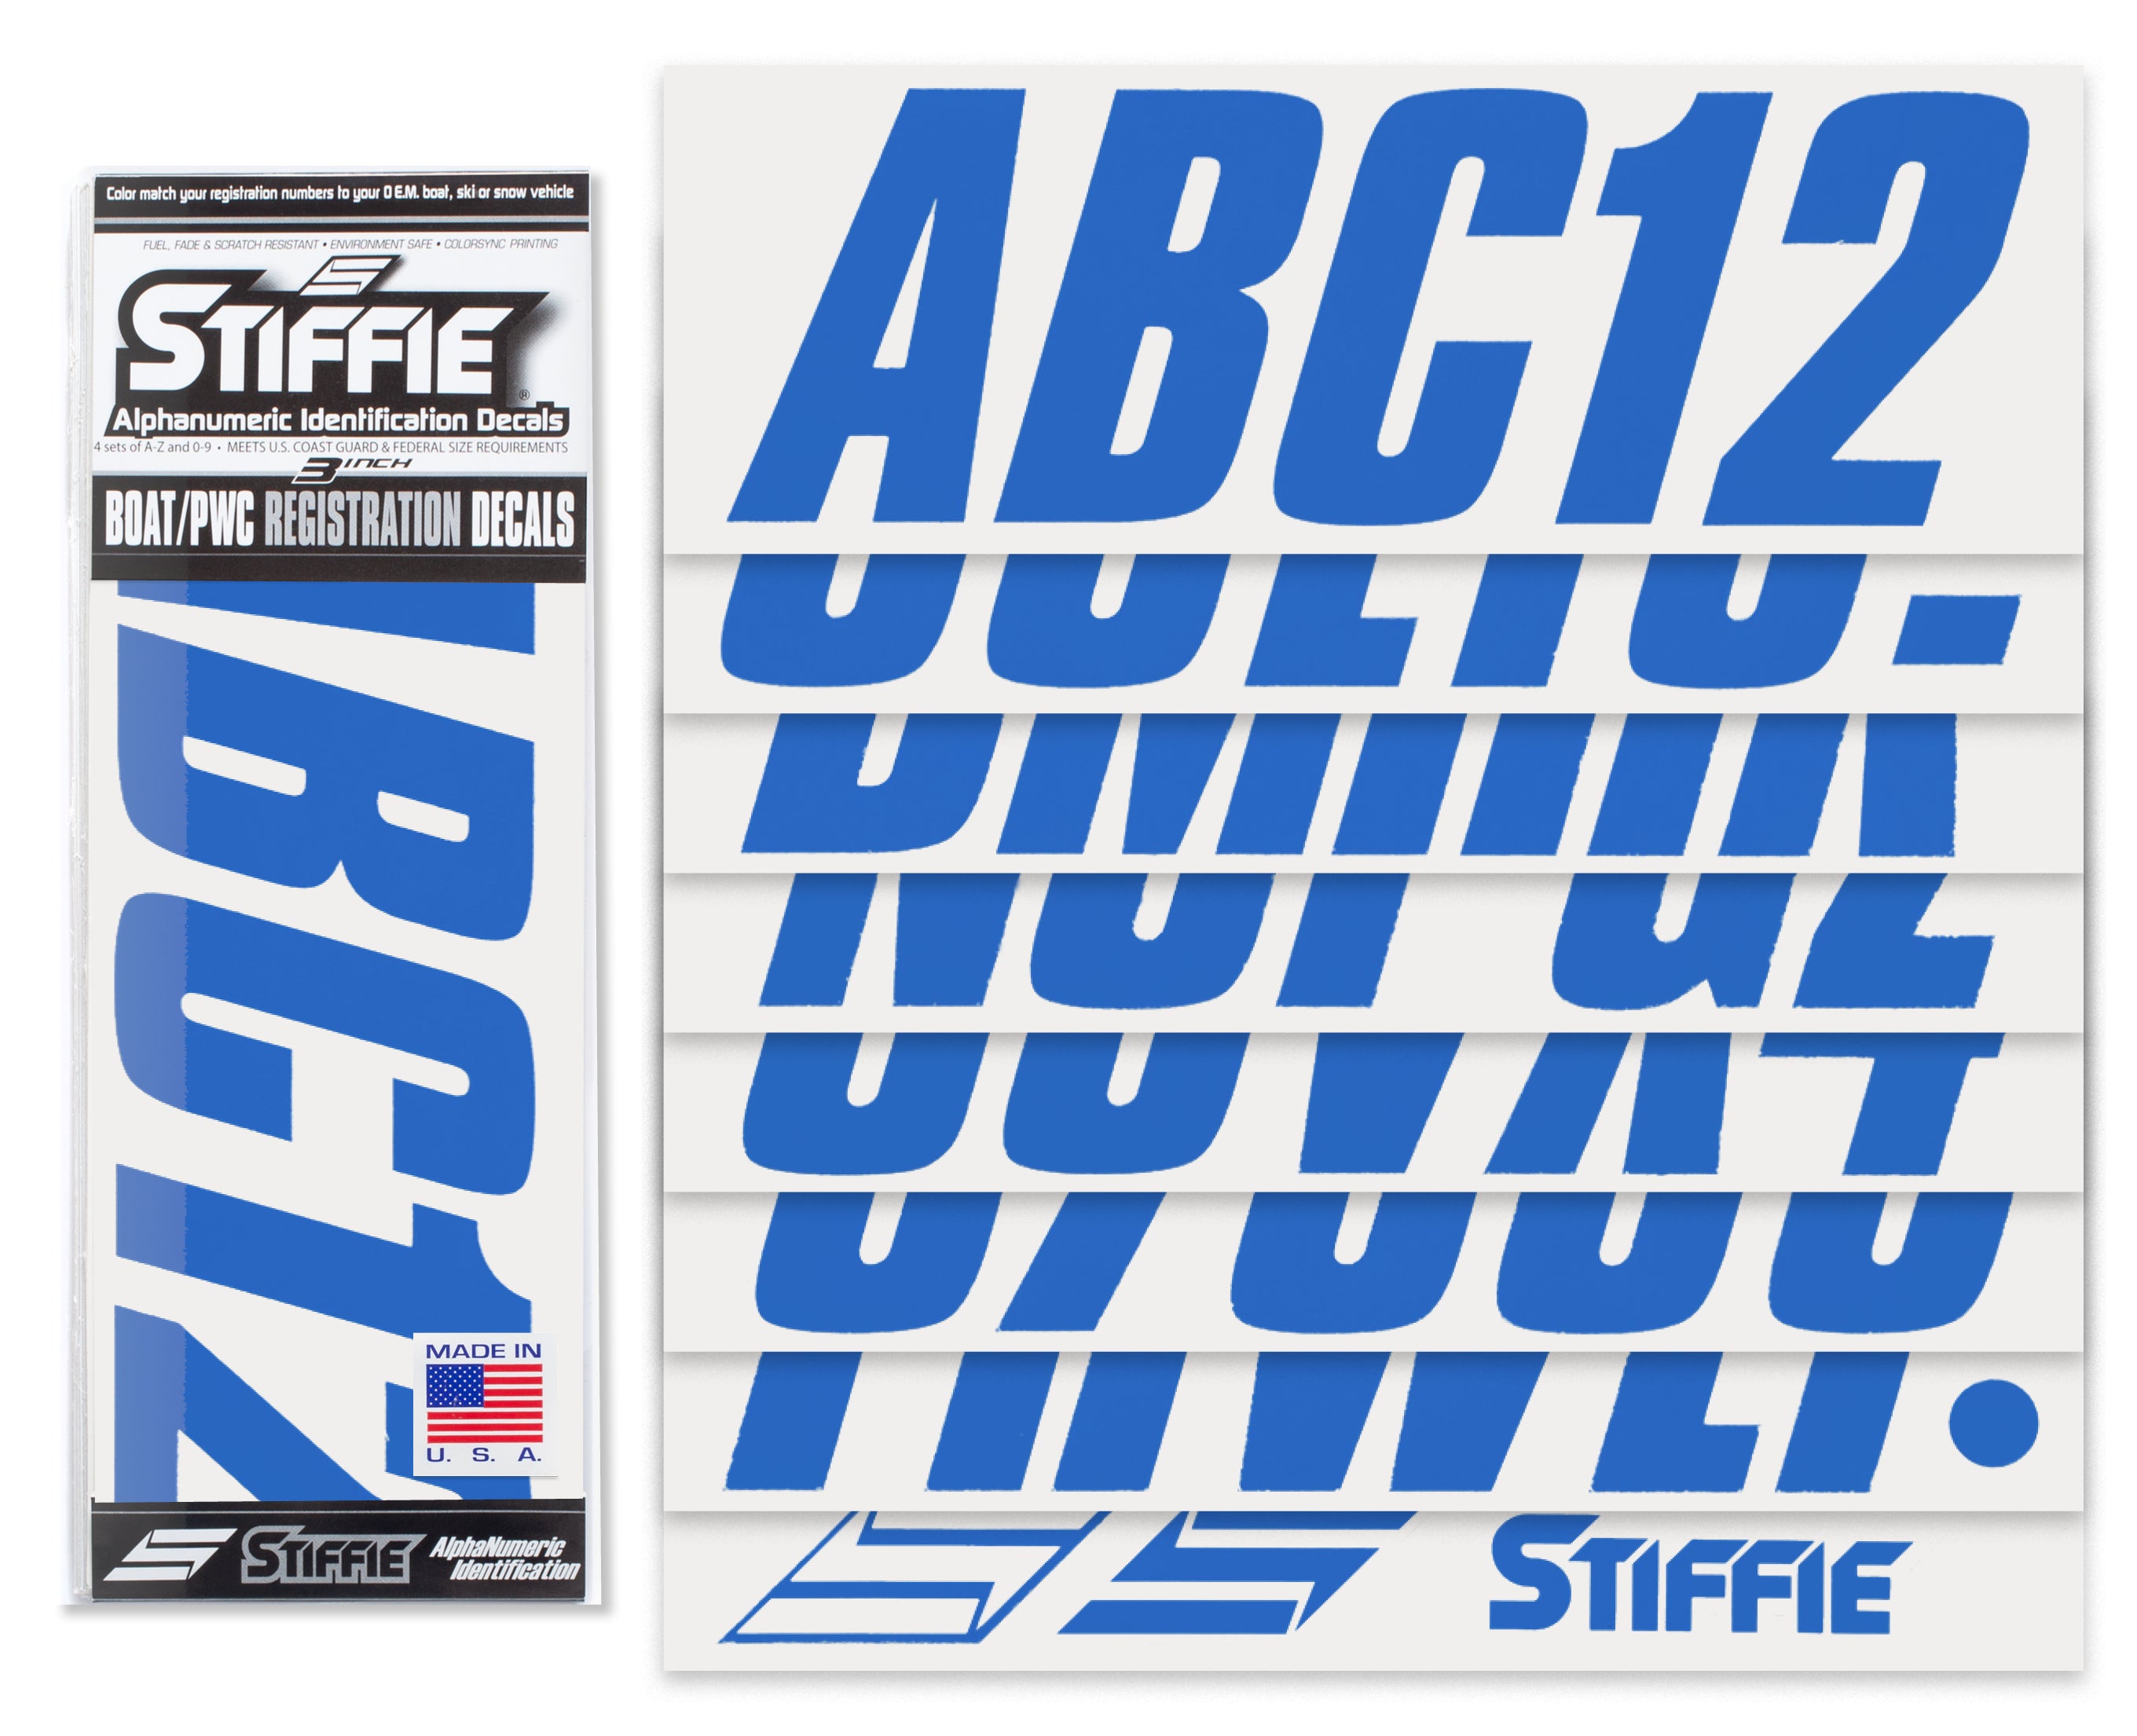 STIFFIE Shift Blue 3" ID Kit Alpha-Numeric Registration Identification Numbers Stickers Decals for Boats & Personal Watercraft